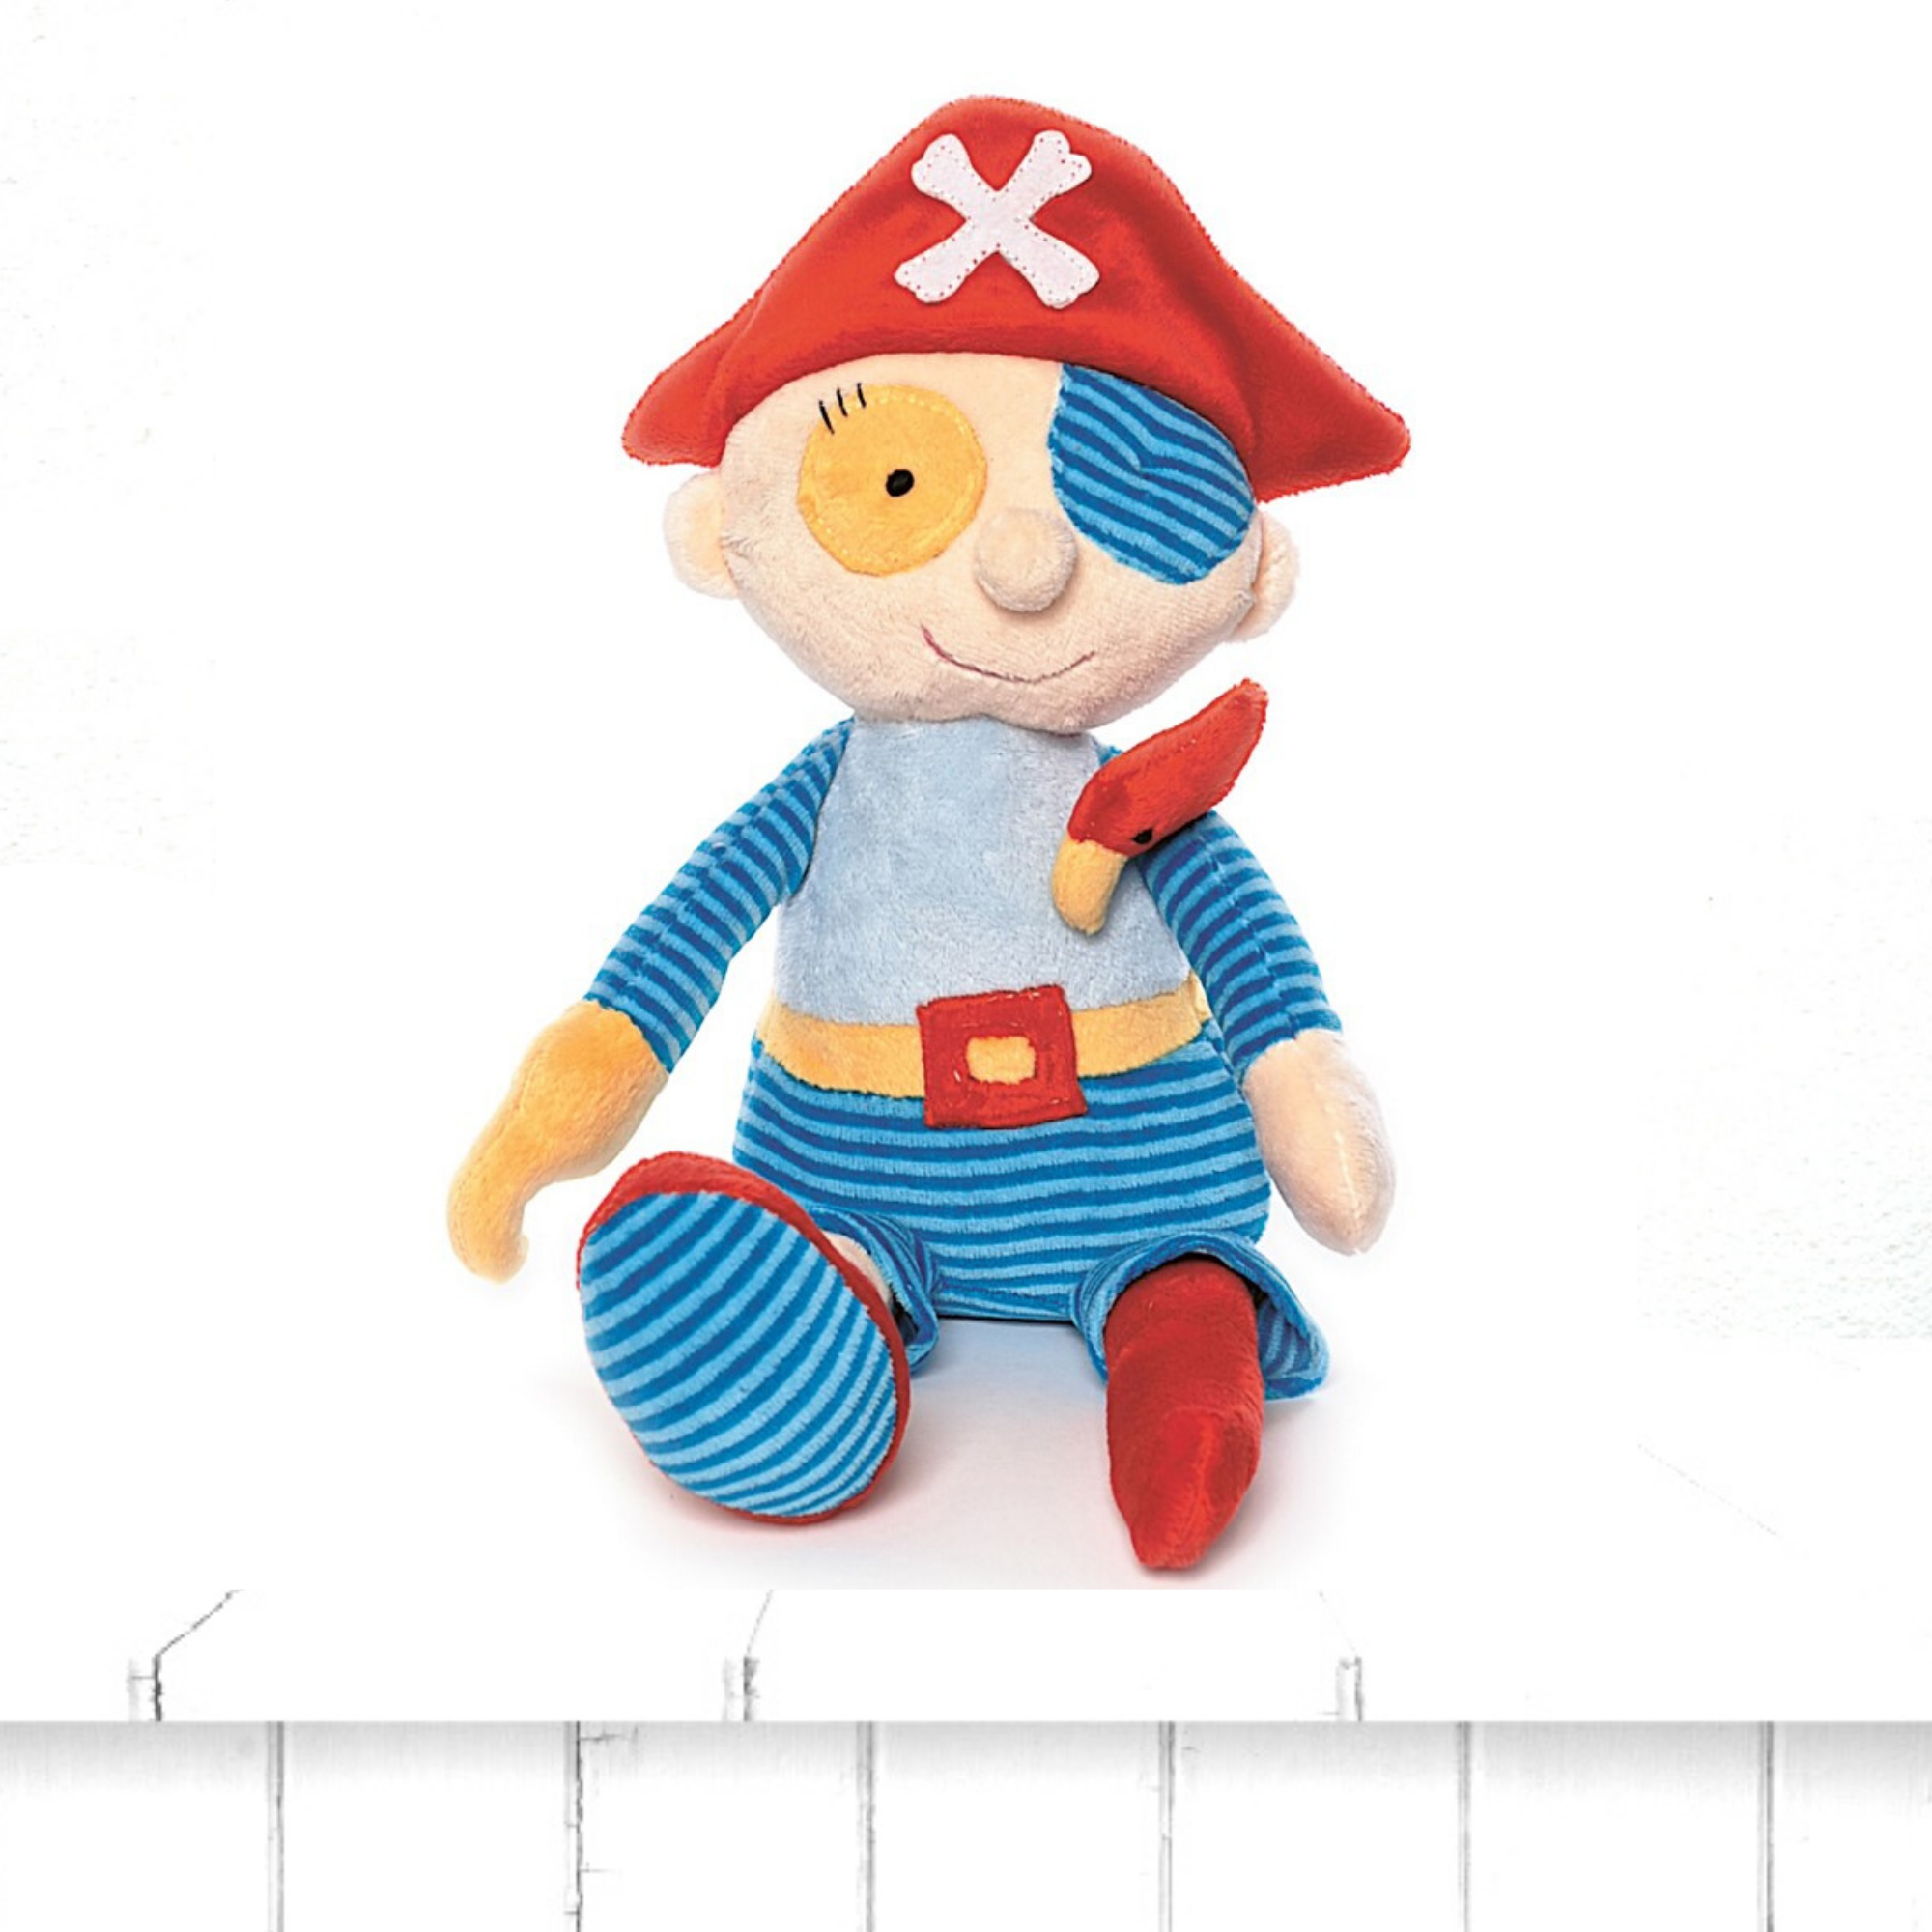 Pete the Pirate soft toy